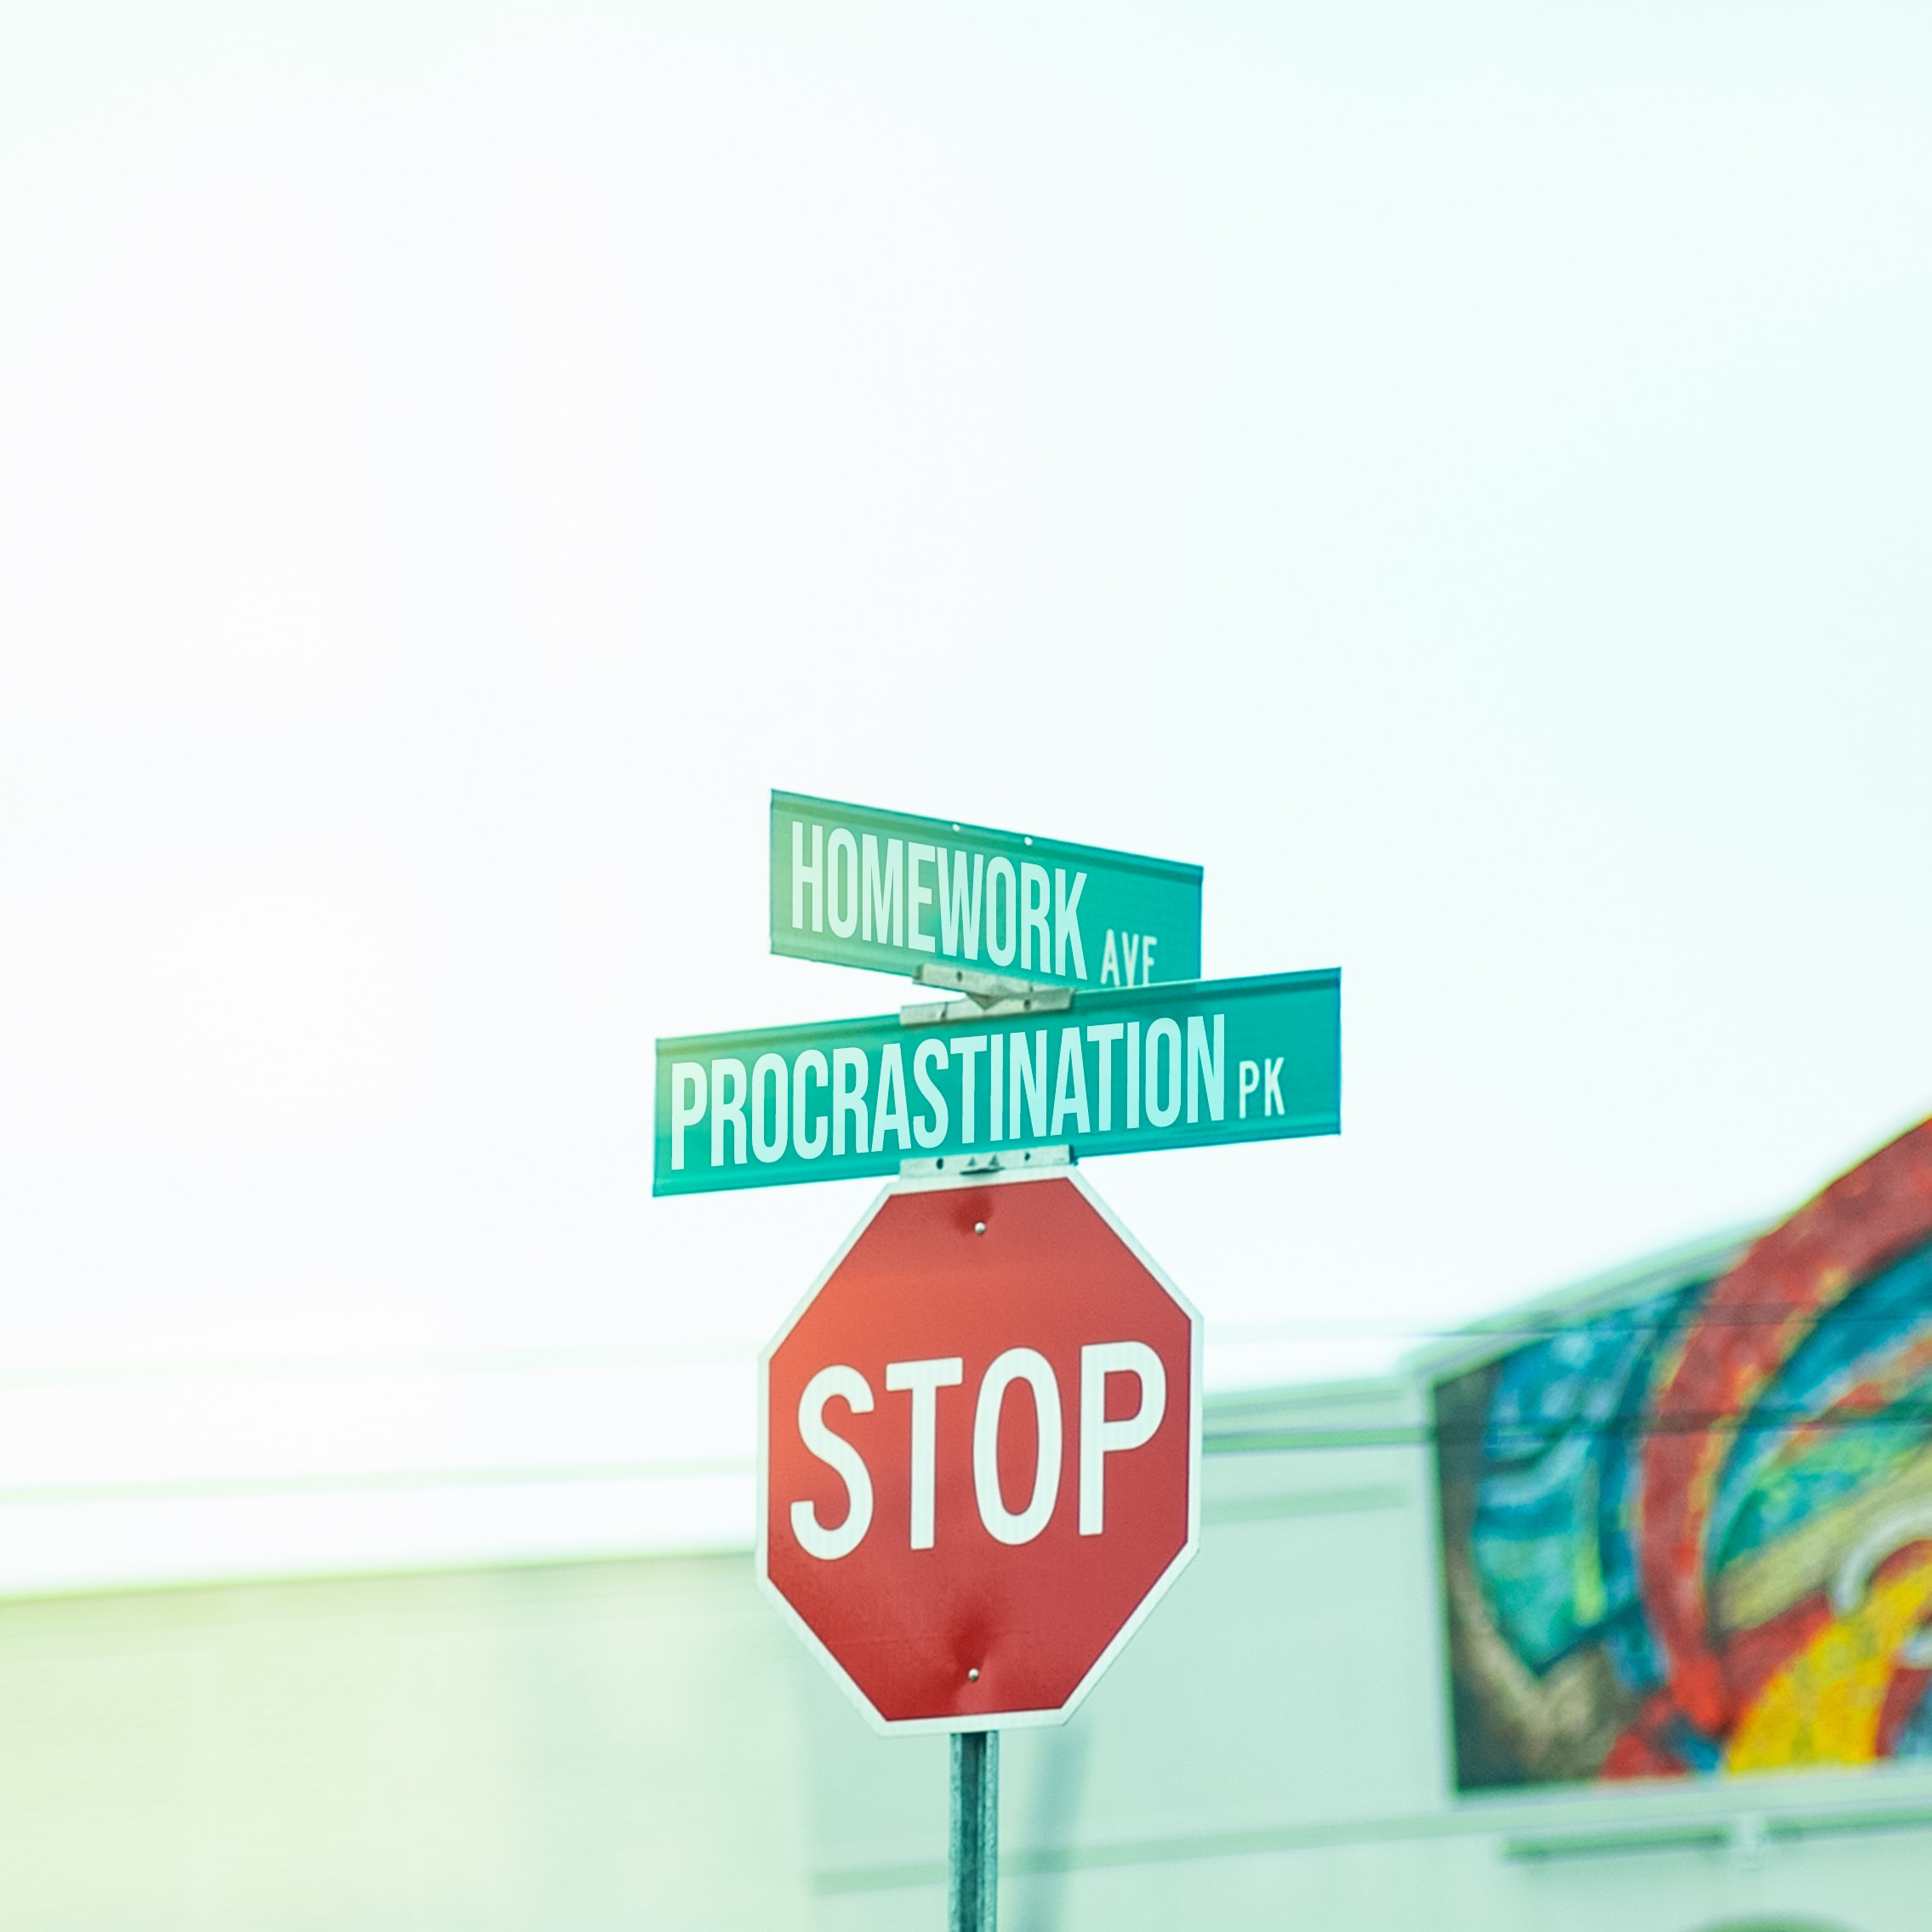 Stop sign with photoshoped street names: "Homework Ave" and "Procrastination Pk".